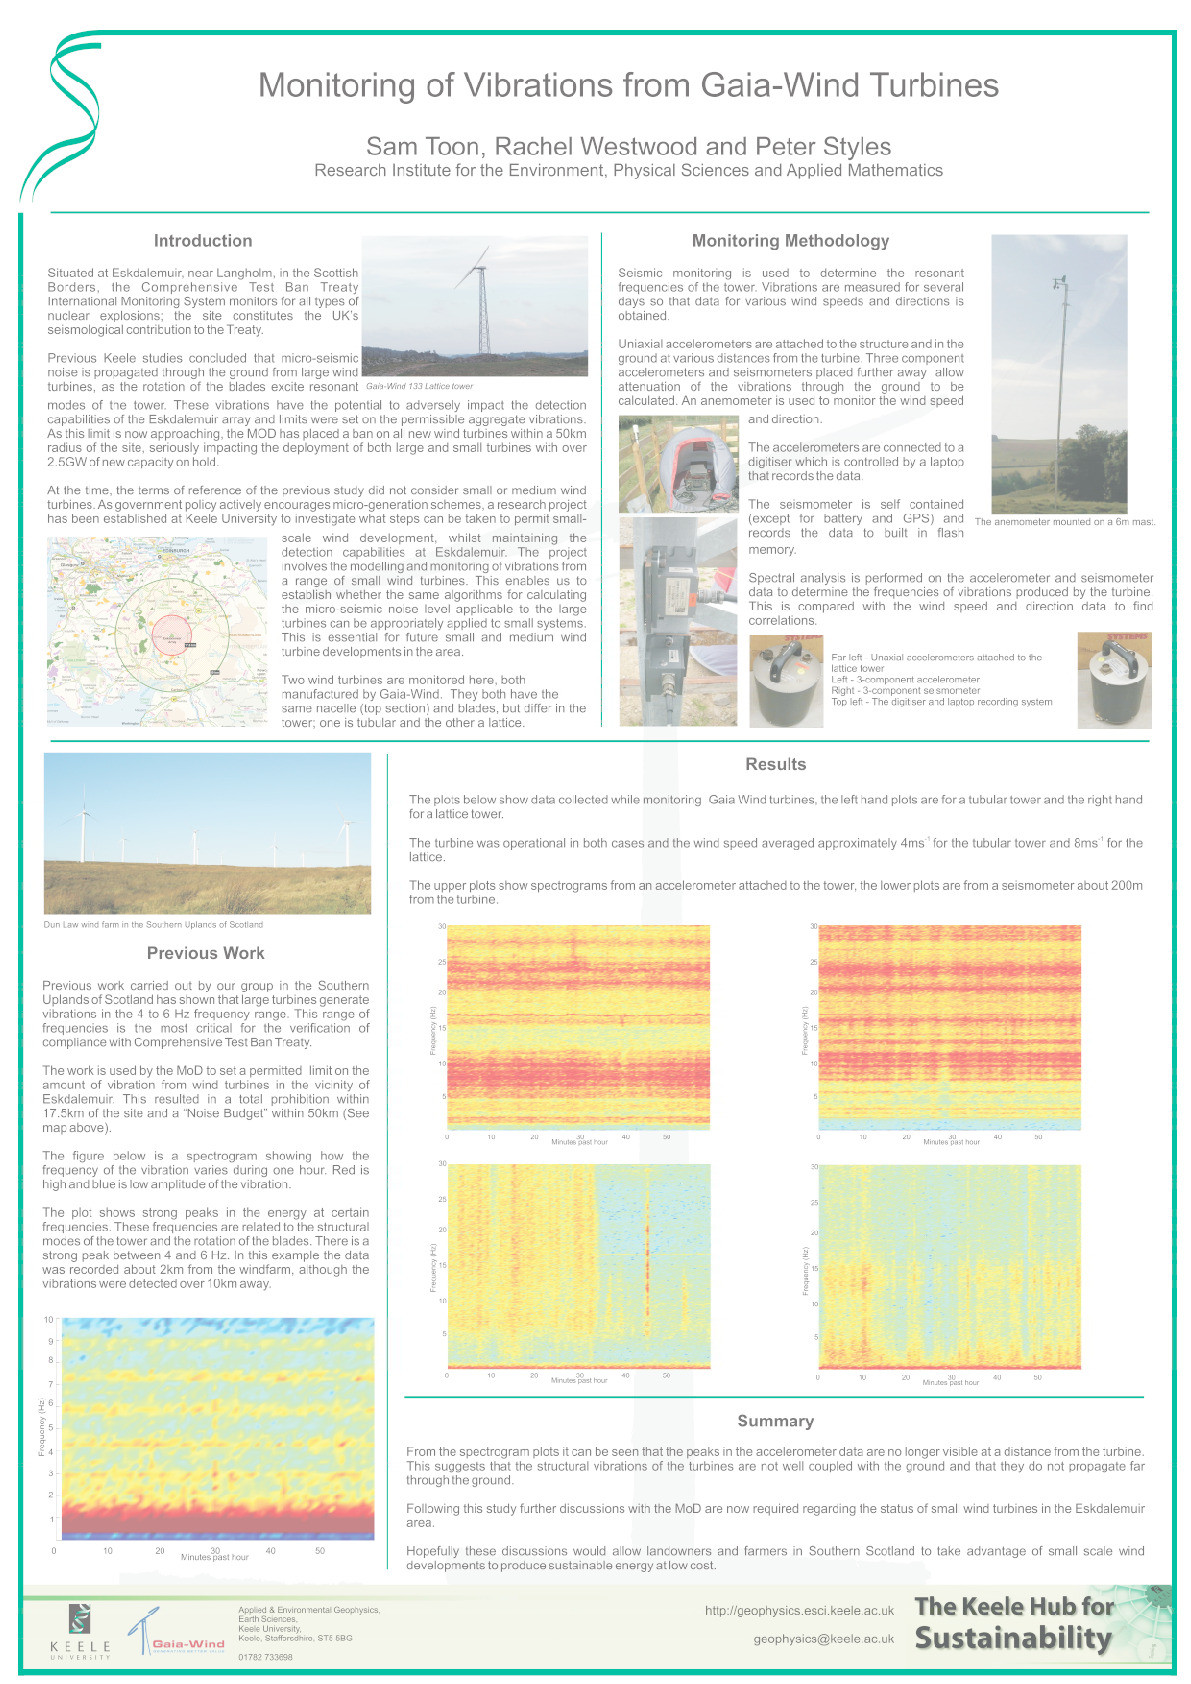 Monitoring of Vibrations from Gaia-Wind Turbines Thumbnail